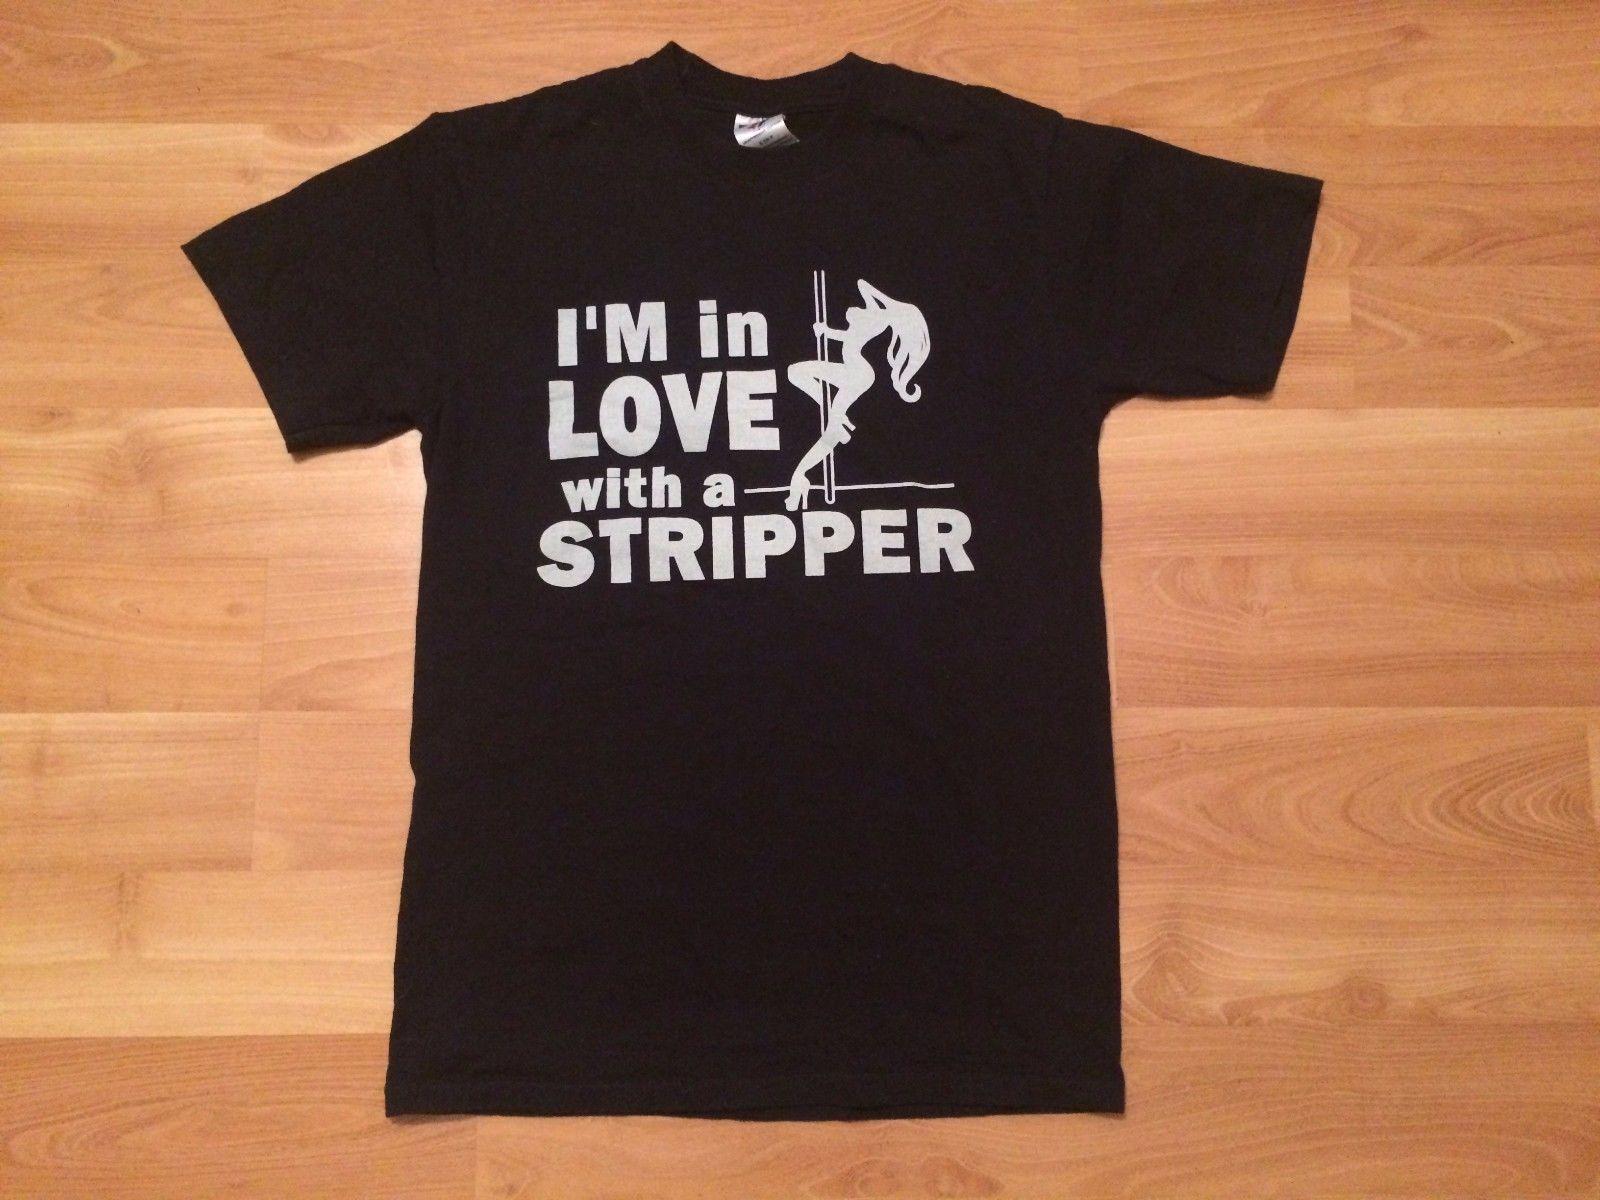 In love with a stripper shirt